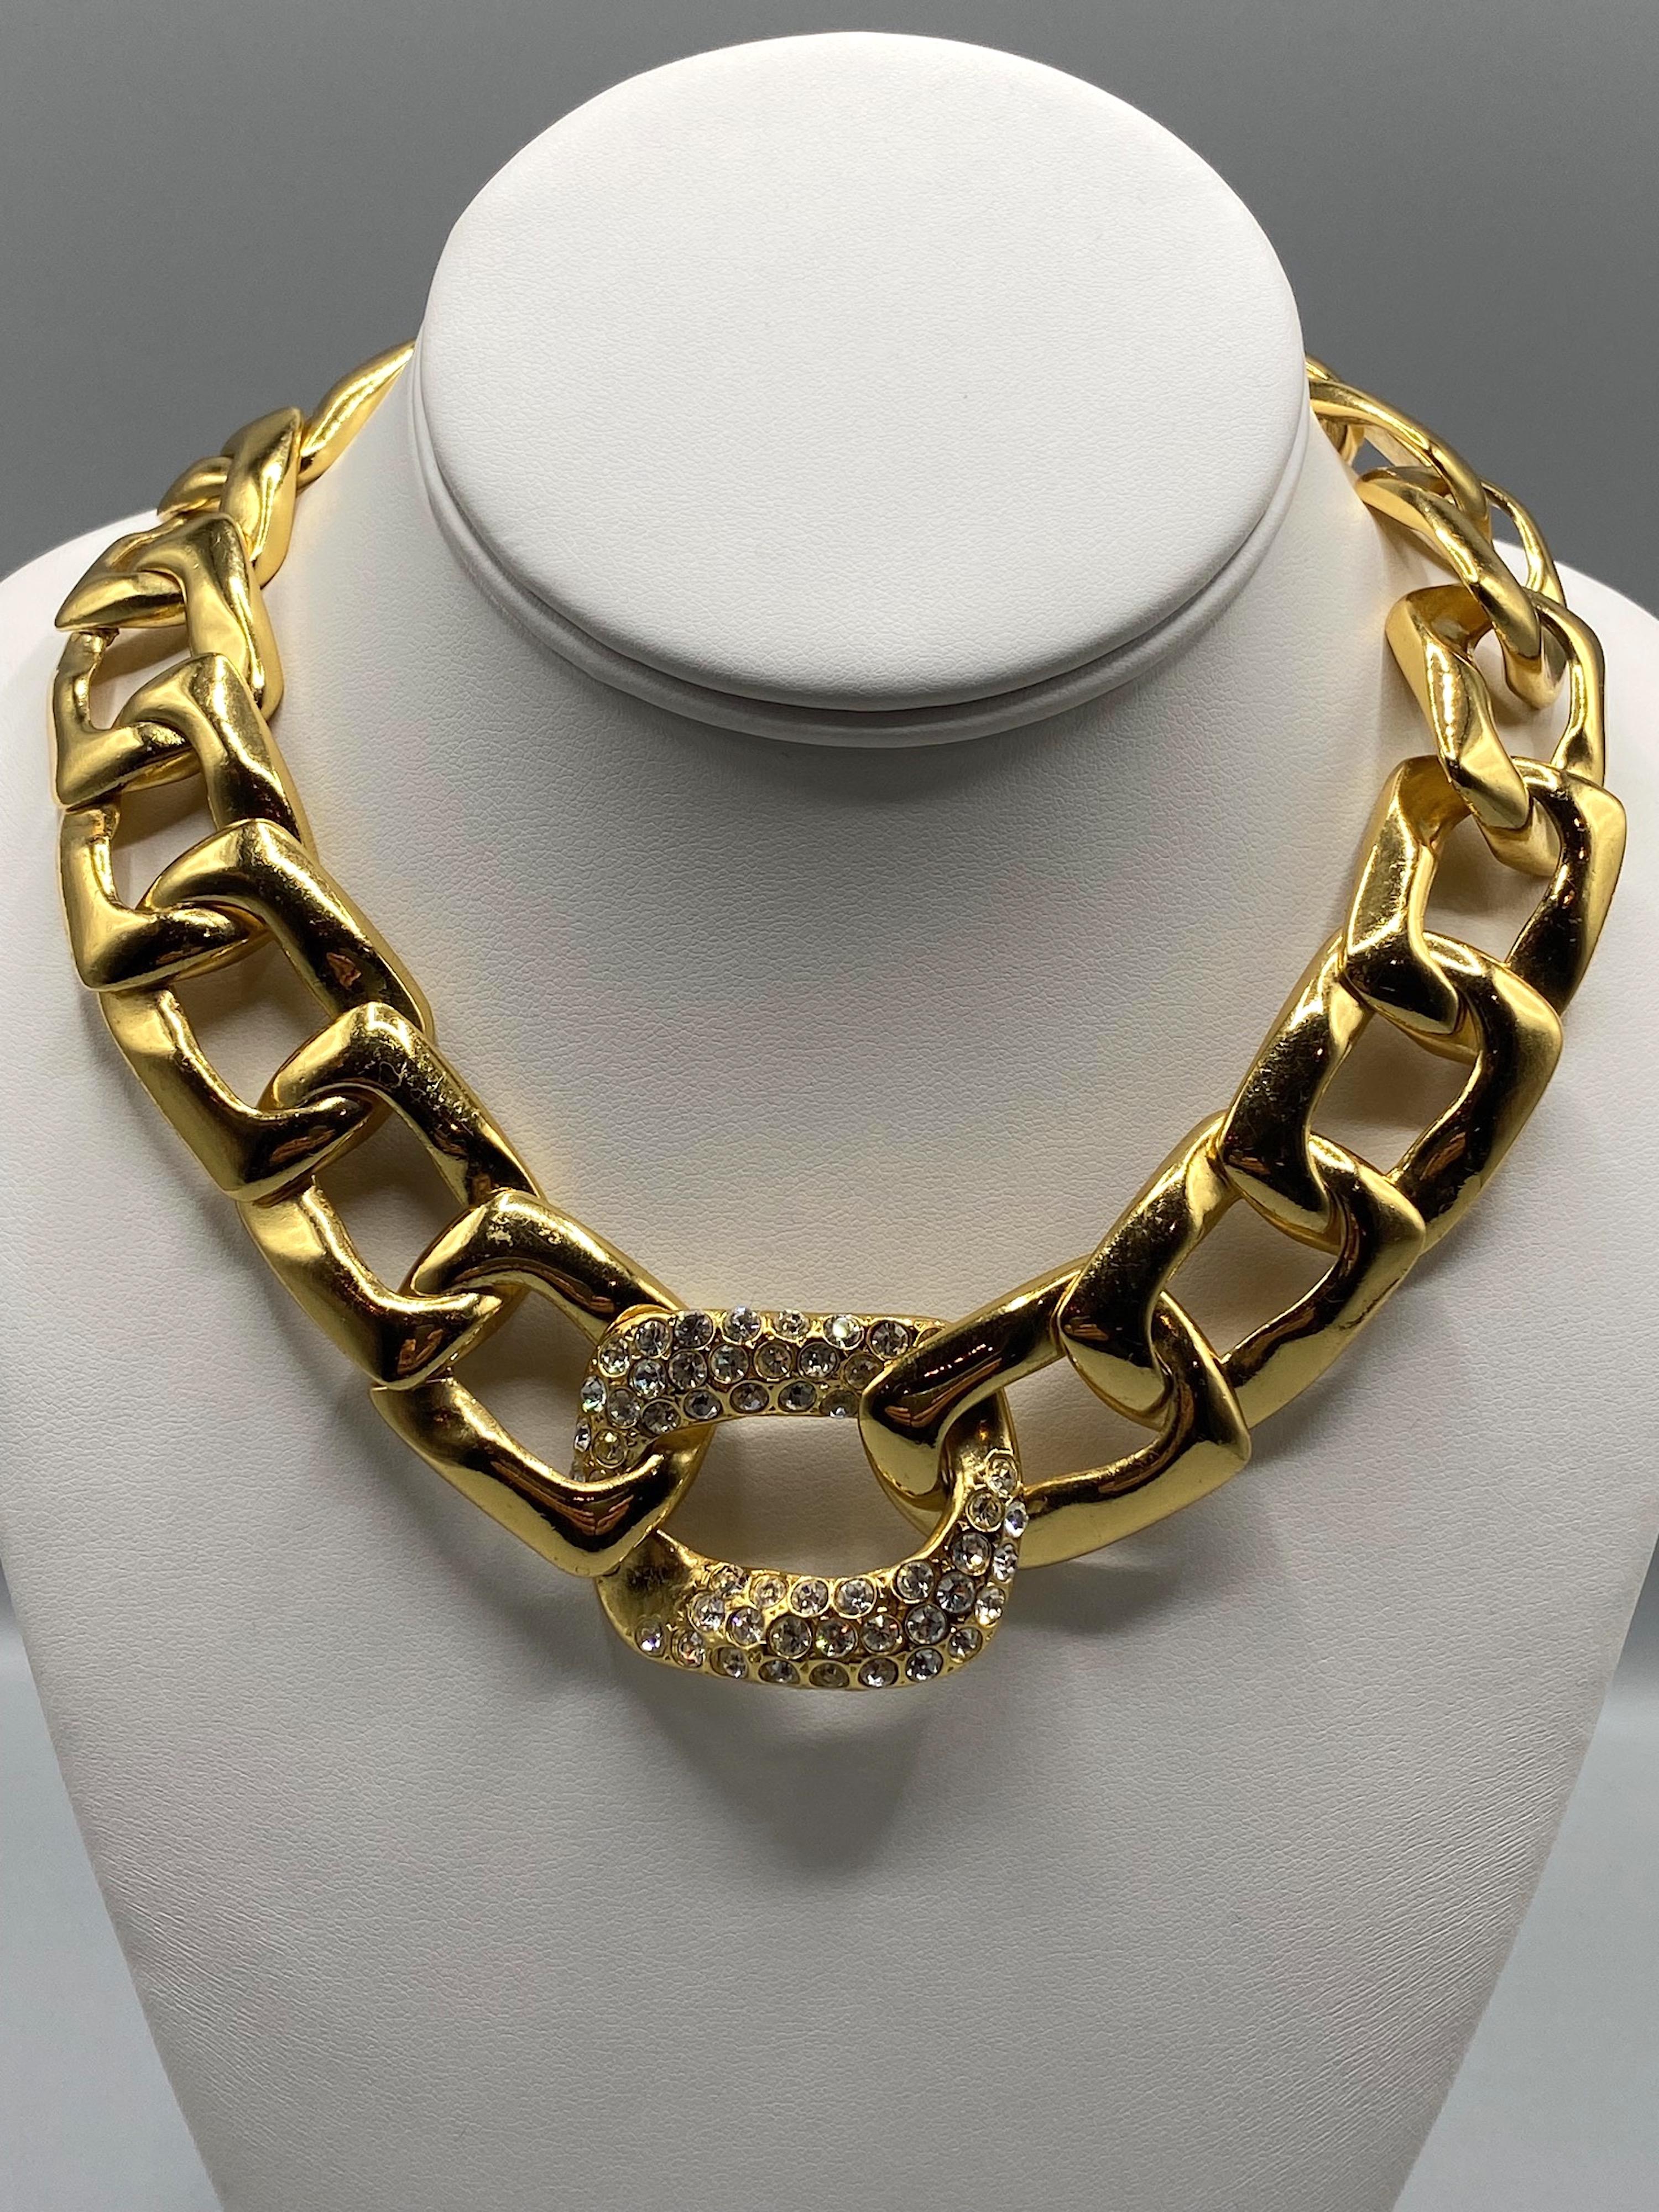 Yves Saint Laurent 1980s Gold with Rhinestone Large Link Necklace For Sale 8